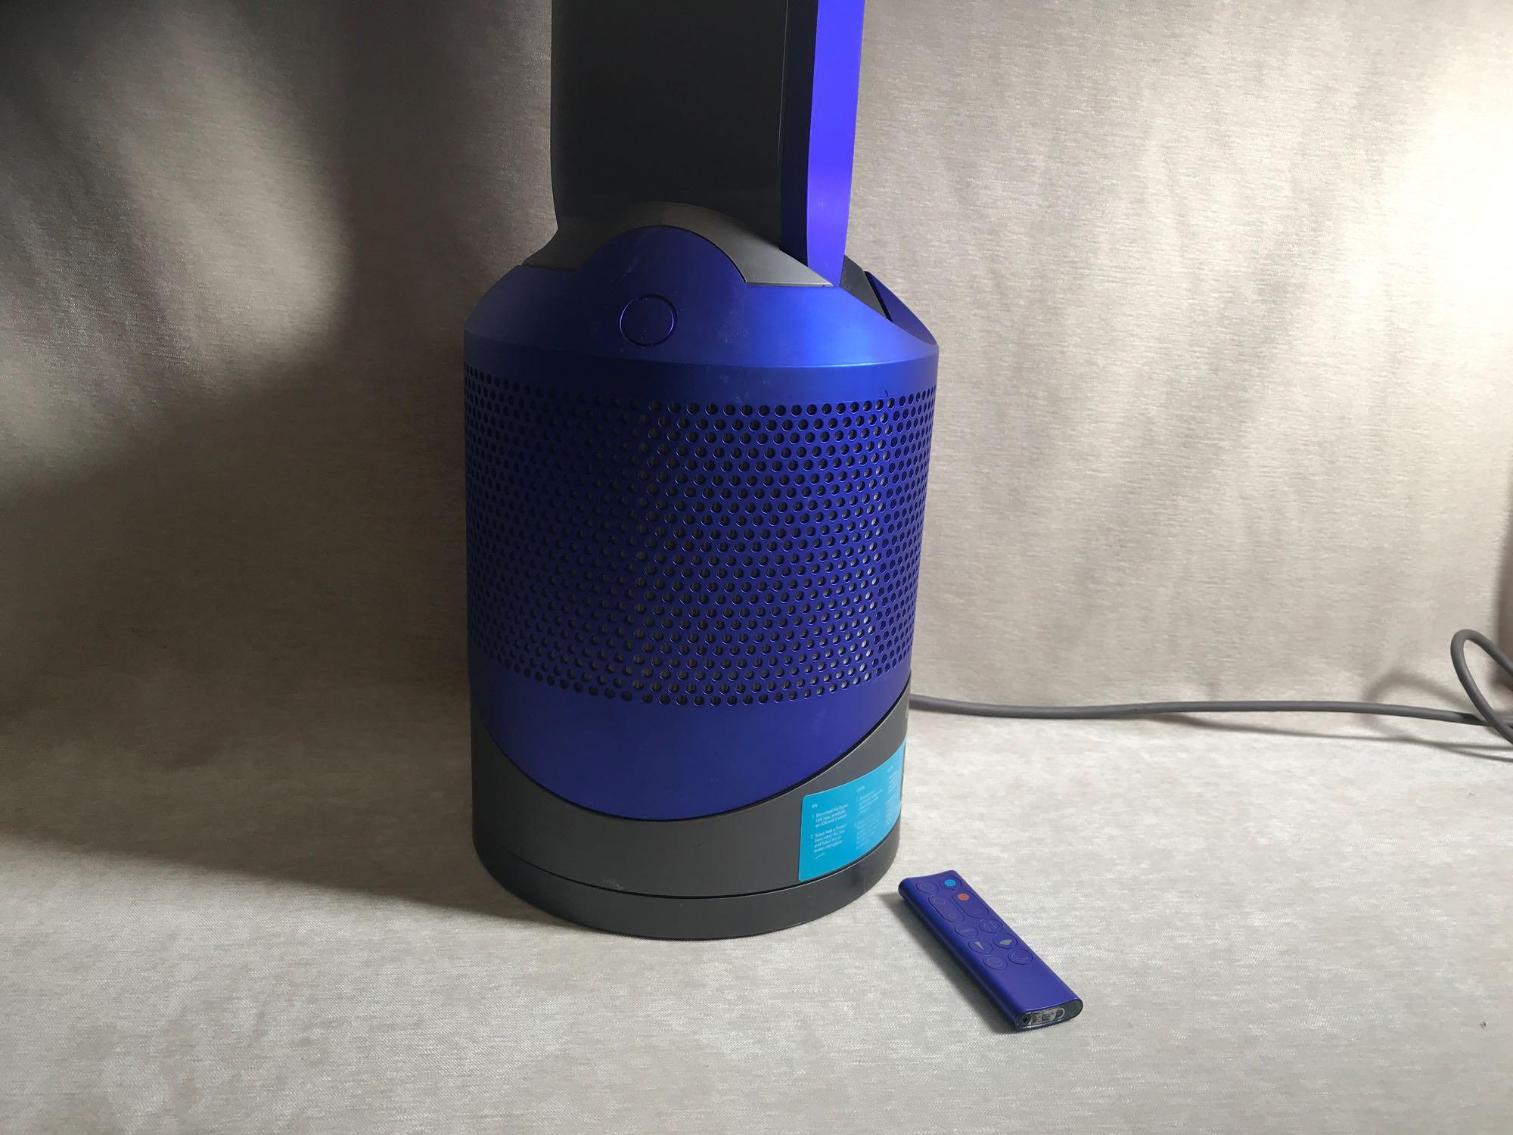 Image for Dyson Air Multiplier Fan with Remote 